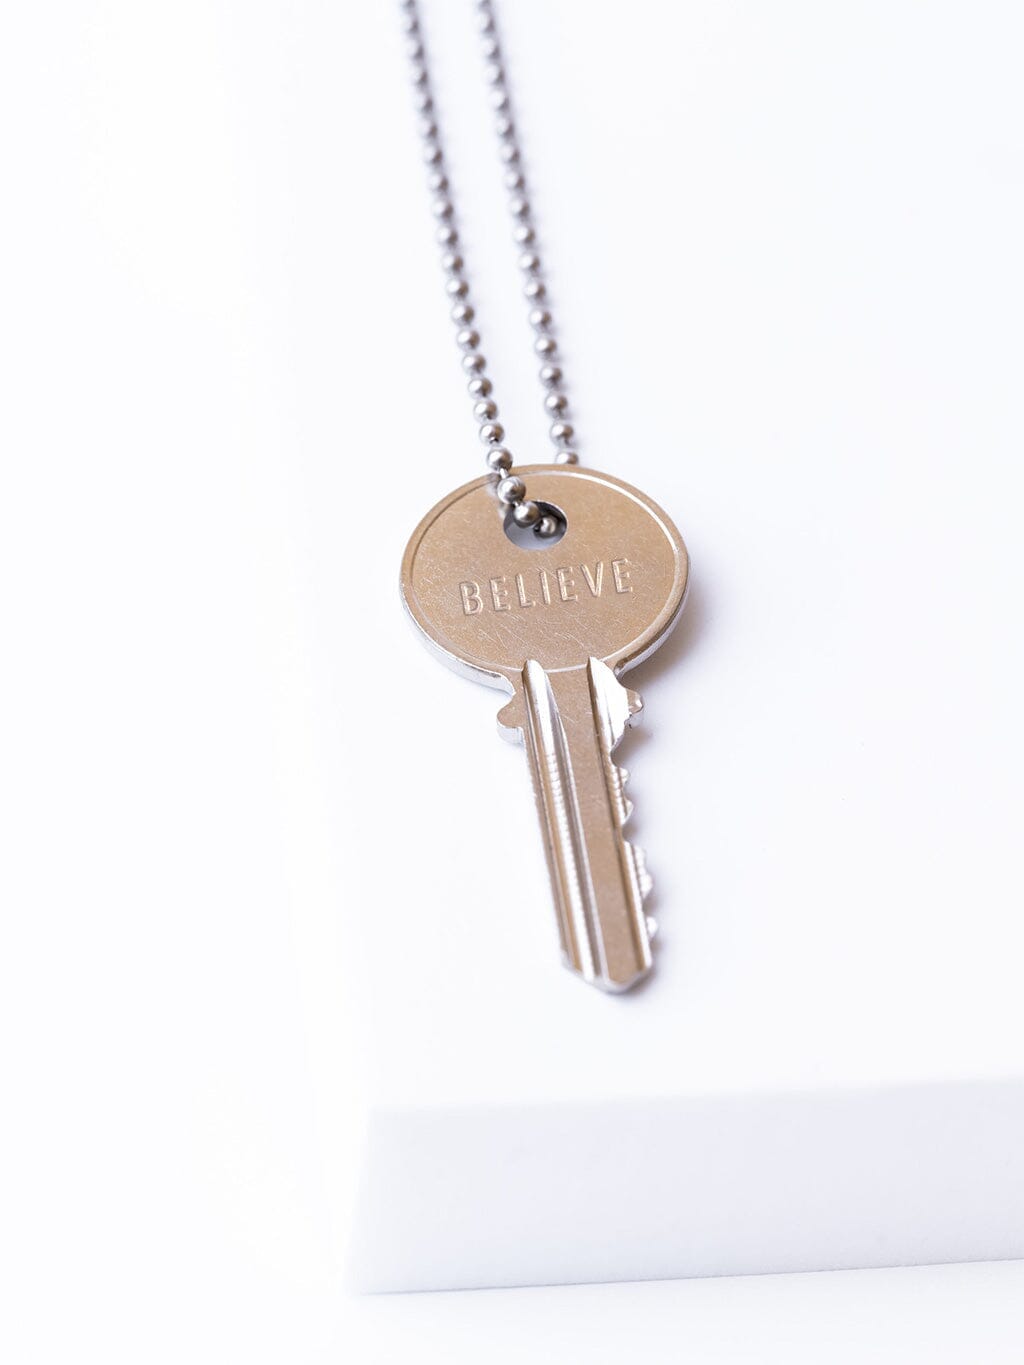 N - Classic Ball Chain Key Necklace Necklaces The Giving Keys Silver Ball 